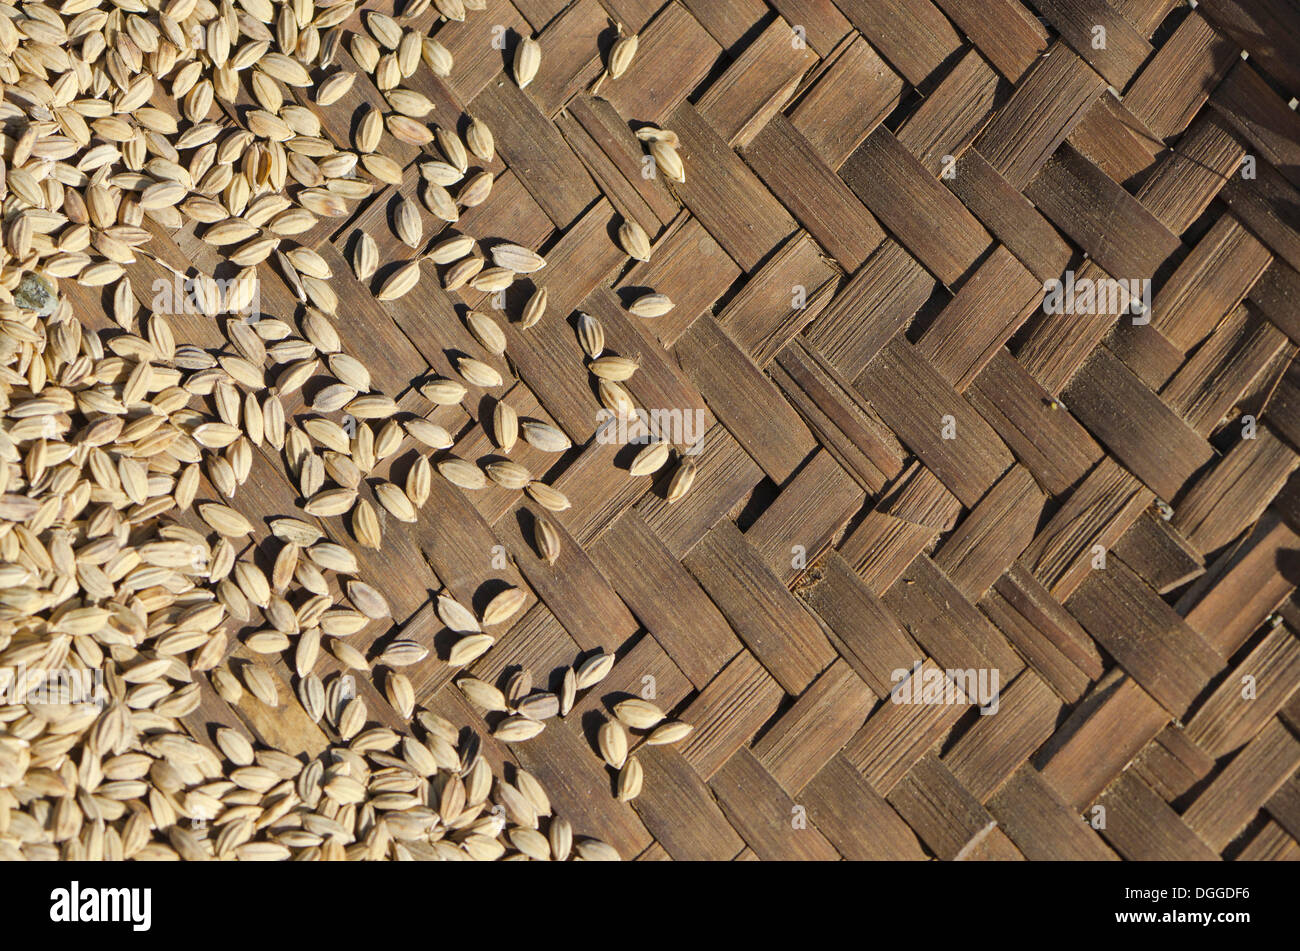 Fennel seeds in basket, Bame Village, India, Asia Stock Photo